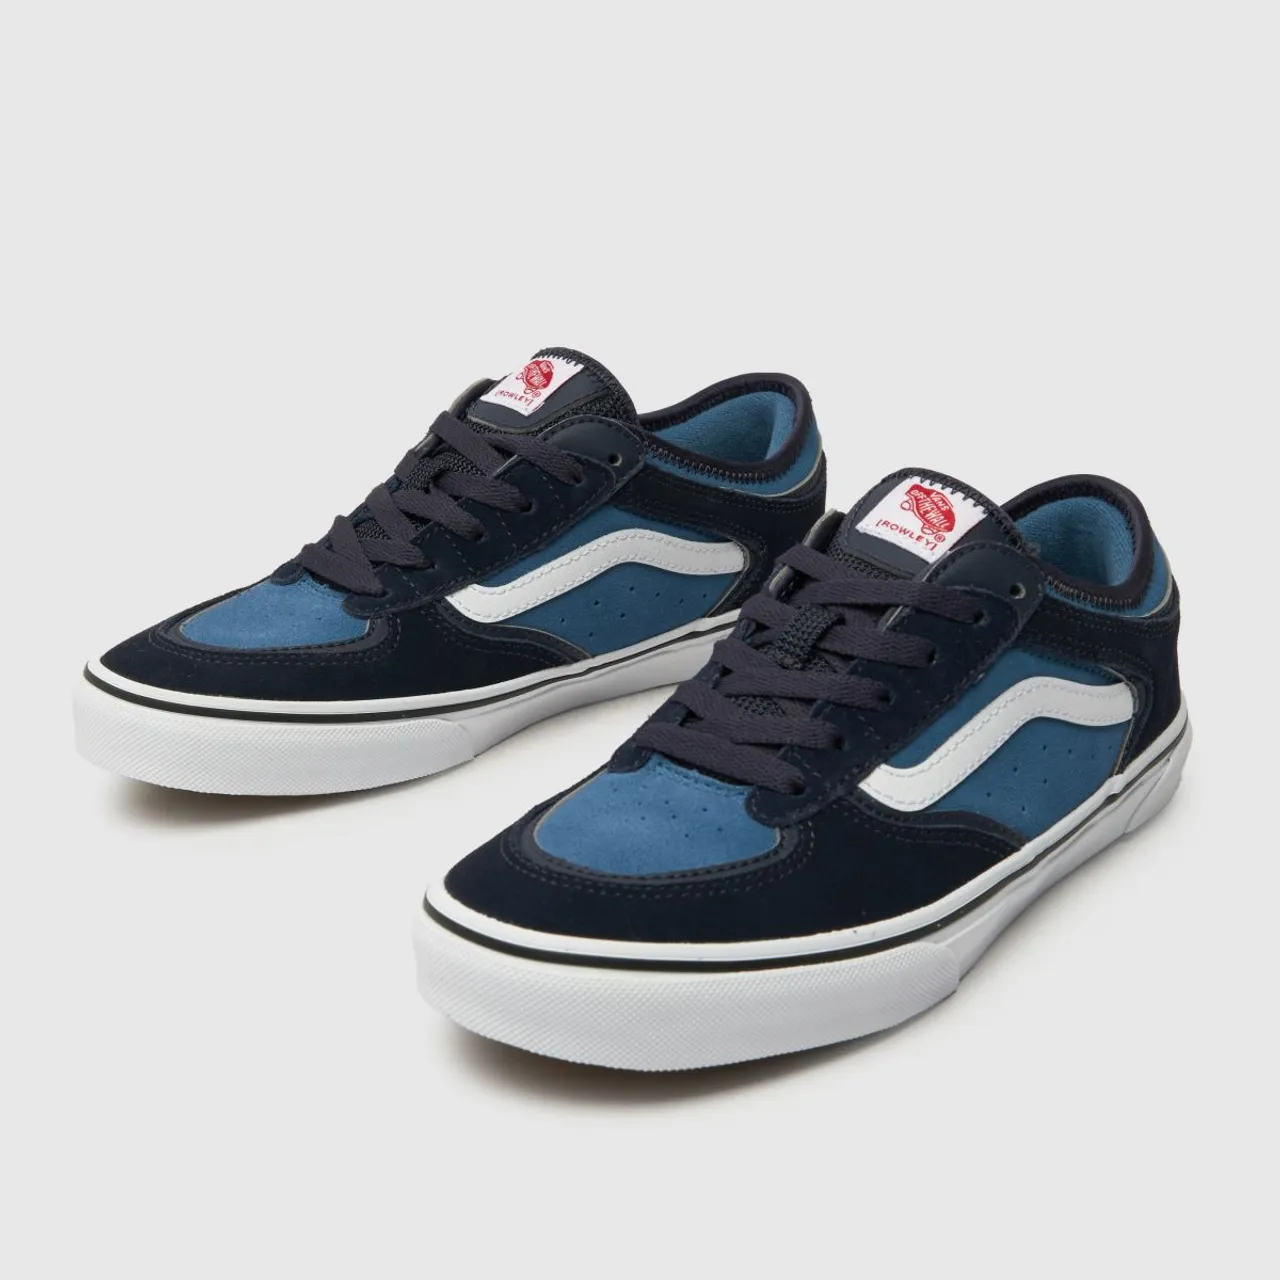 Vans Navy & White Rowley Classic Boys Youth Trainers